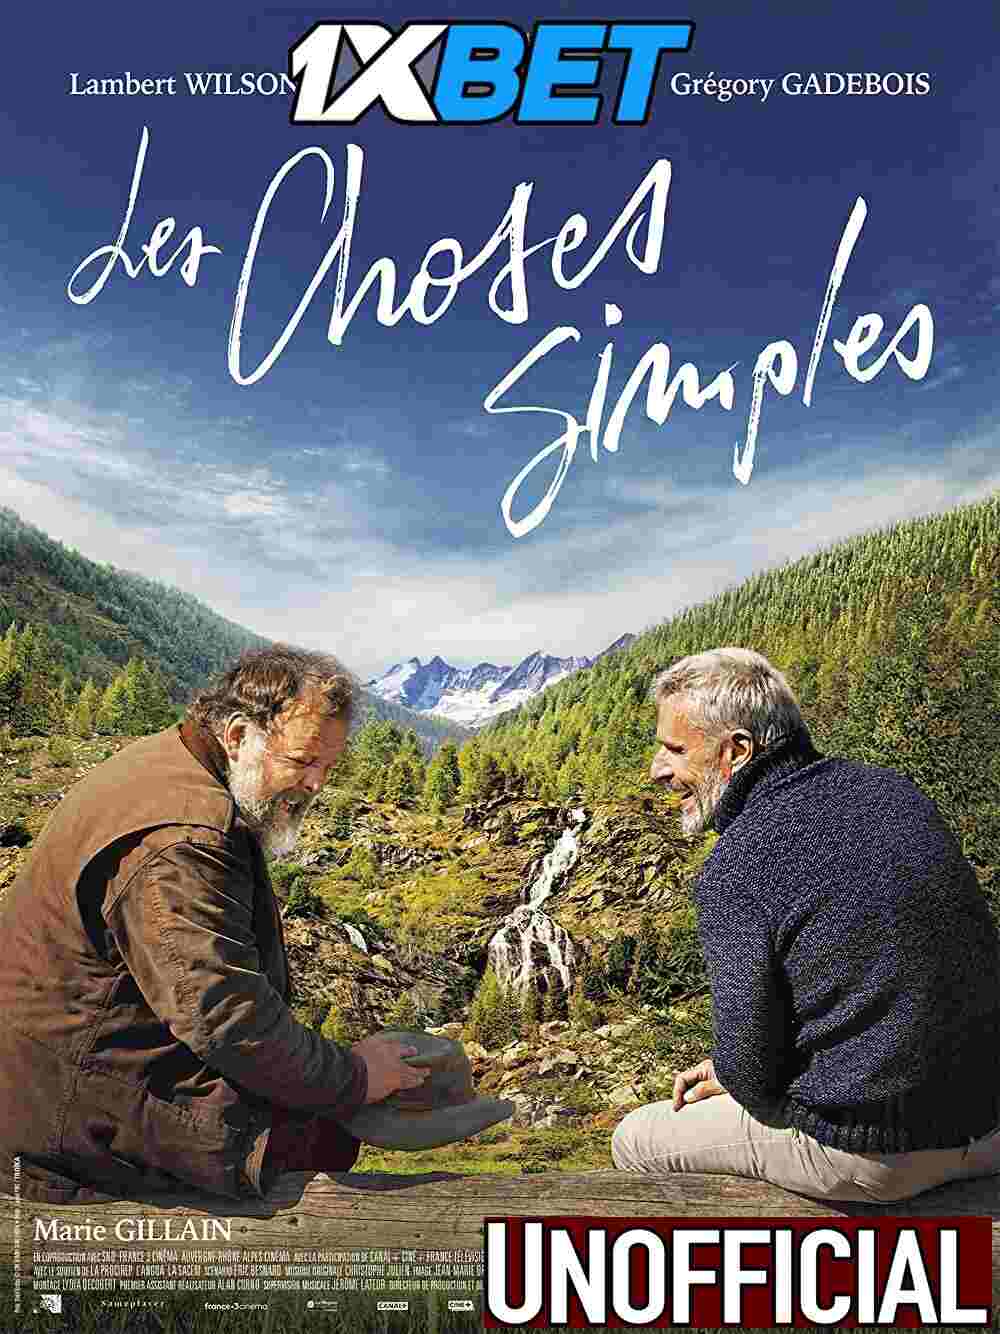 Watch Les choses simples (2023) Full Movie [In French] With Hindi Subtitles  CAMRip 720p Online Stream – 1XBET